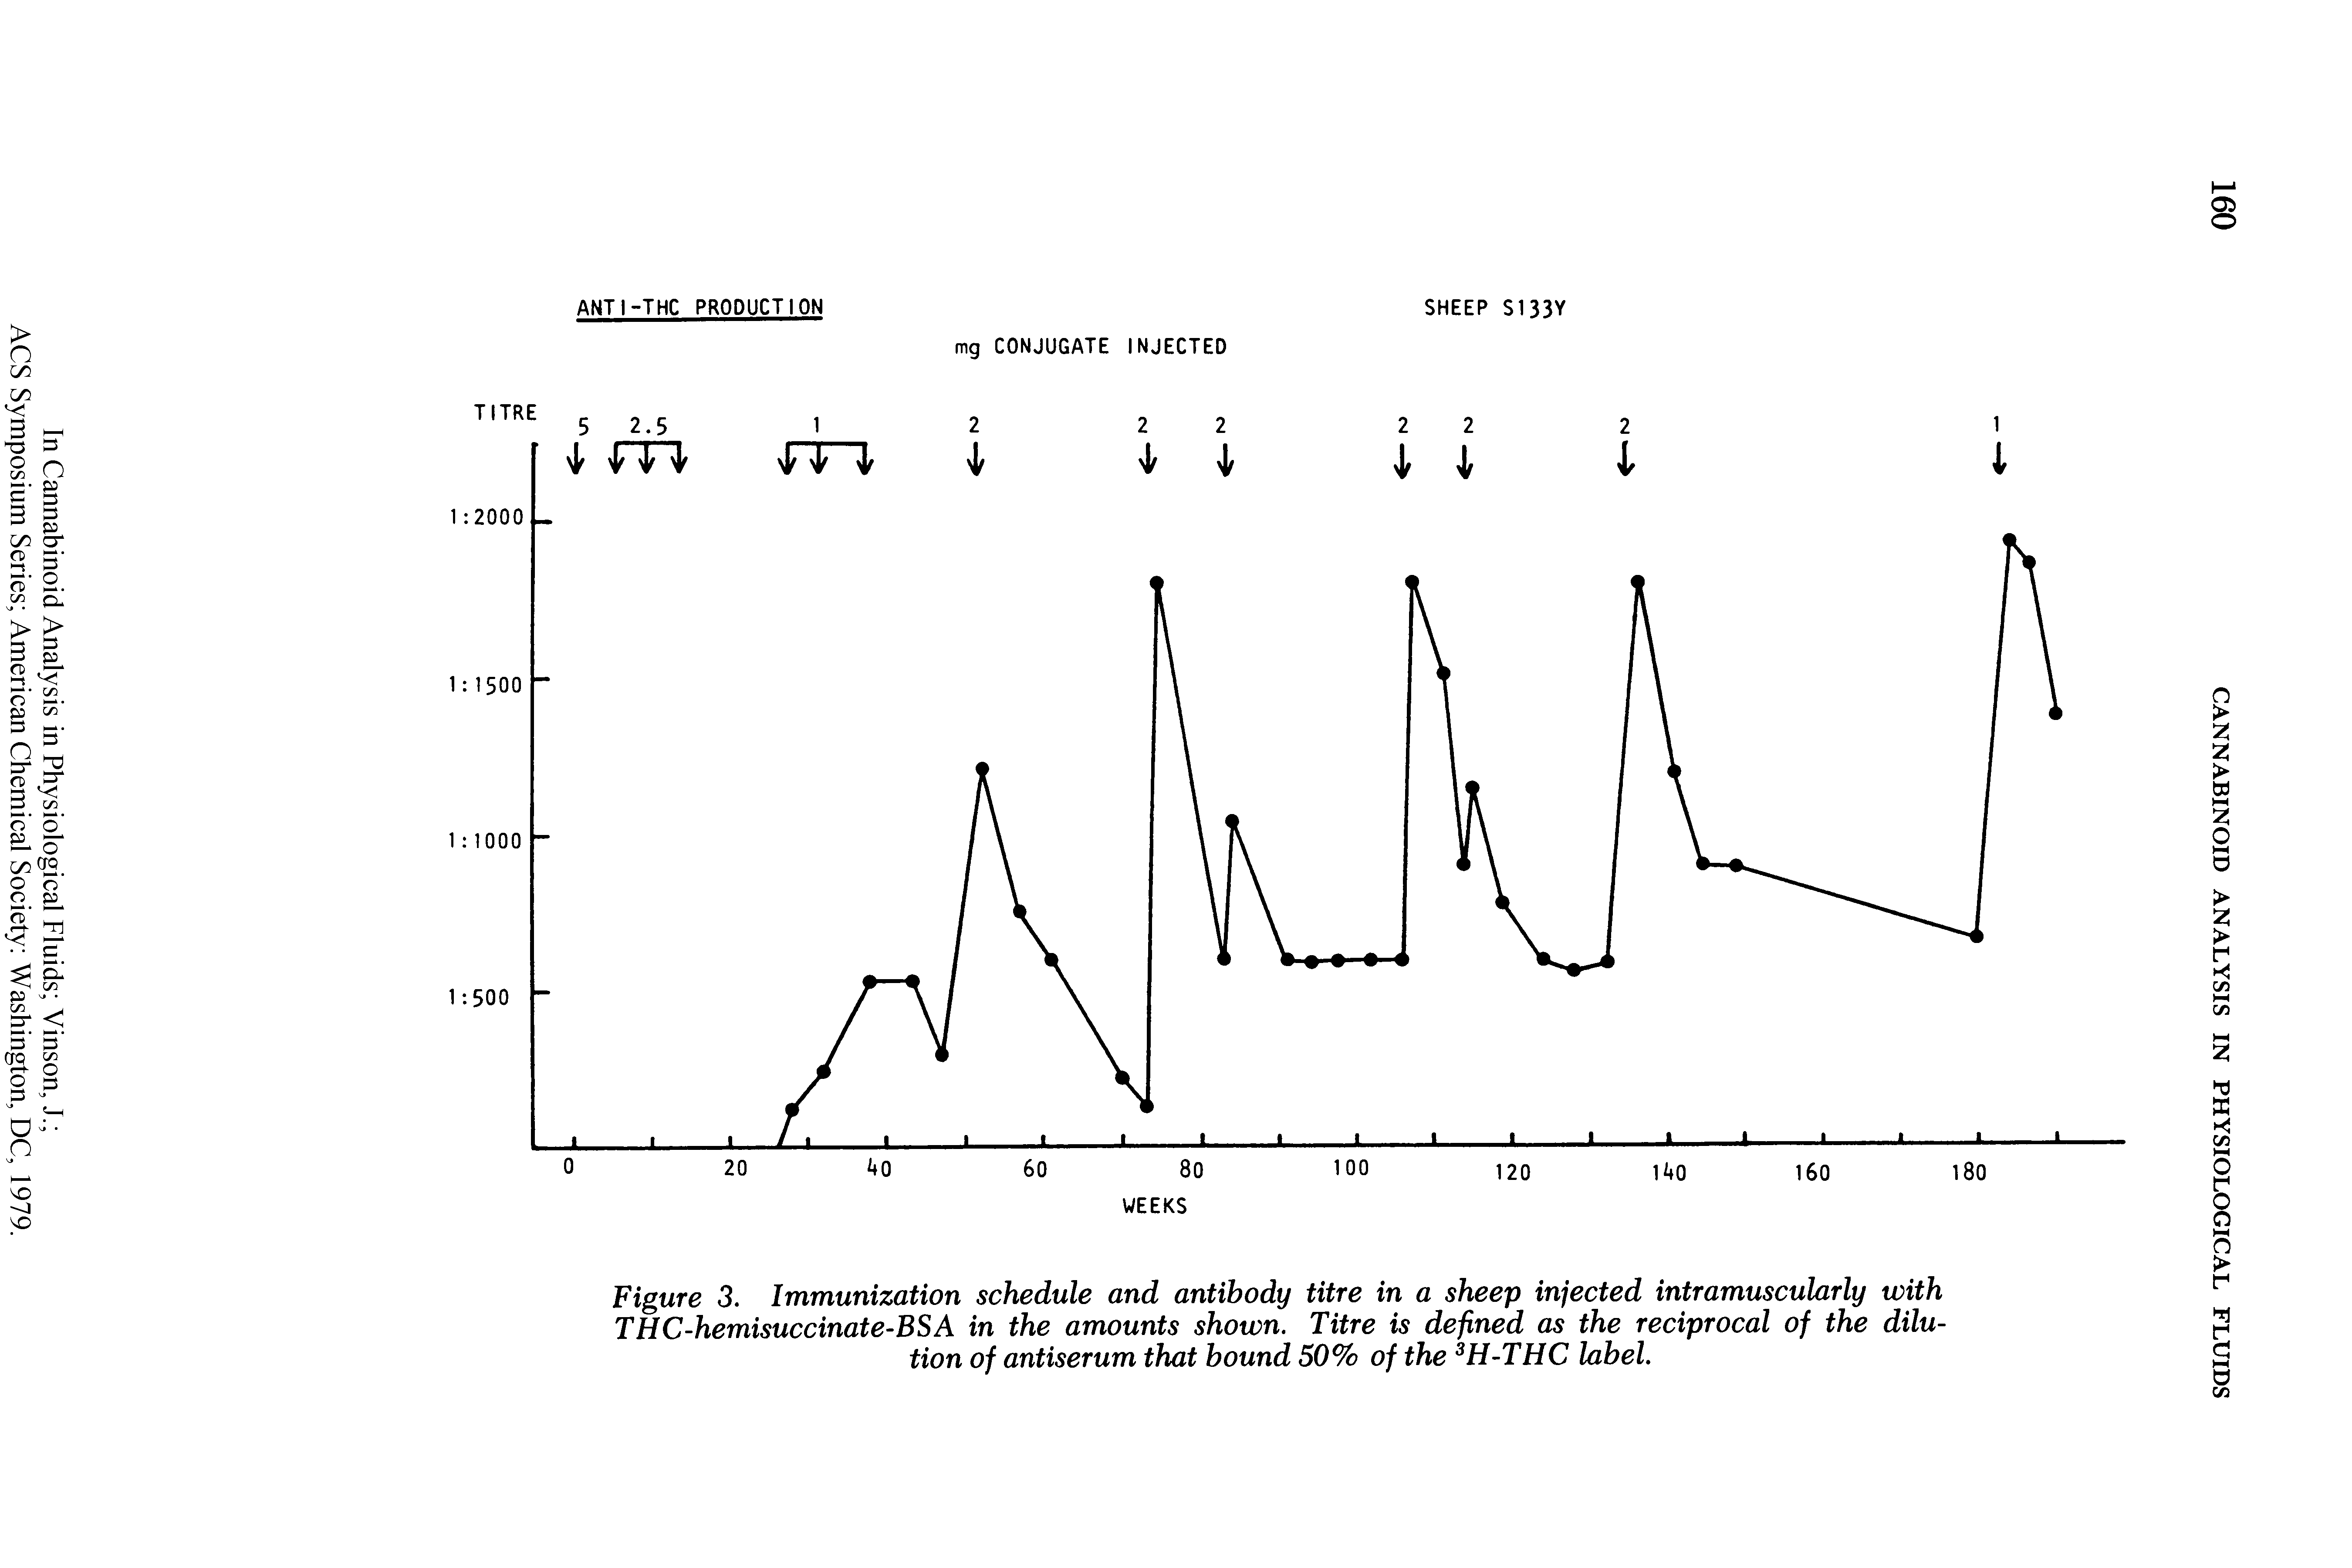 Figure 3. Immunization schedule and antibody titre in a sheep injected intramuscularly with THC-hemisuccinate-BSA in the amounts shown. Titre is defined as the reciprocal of the dilution of antiserum that bound 50% of the 3H-THC label.